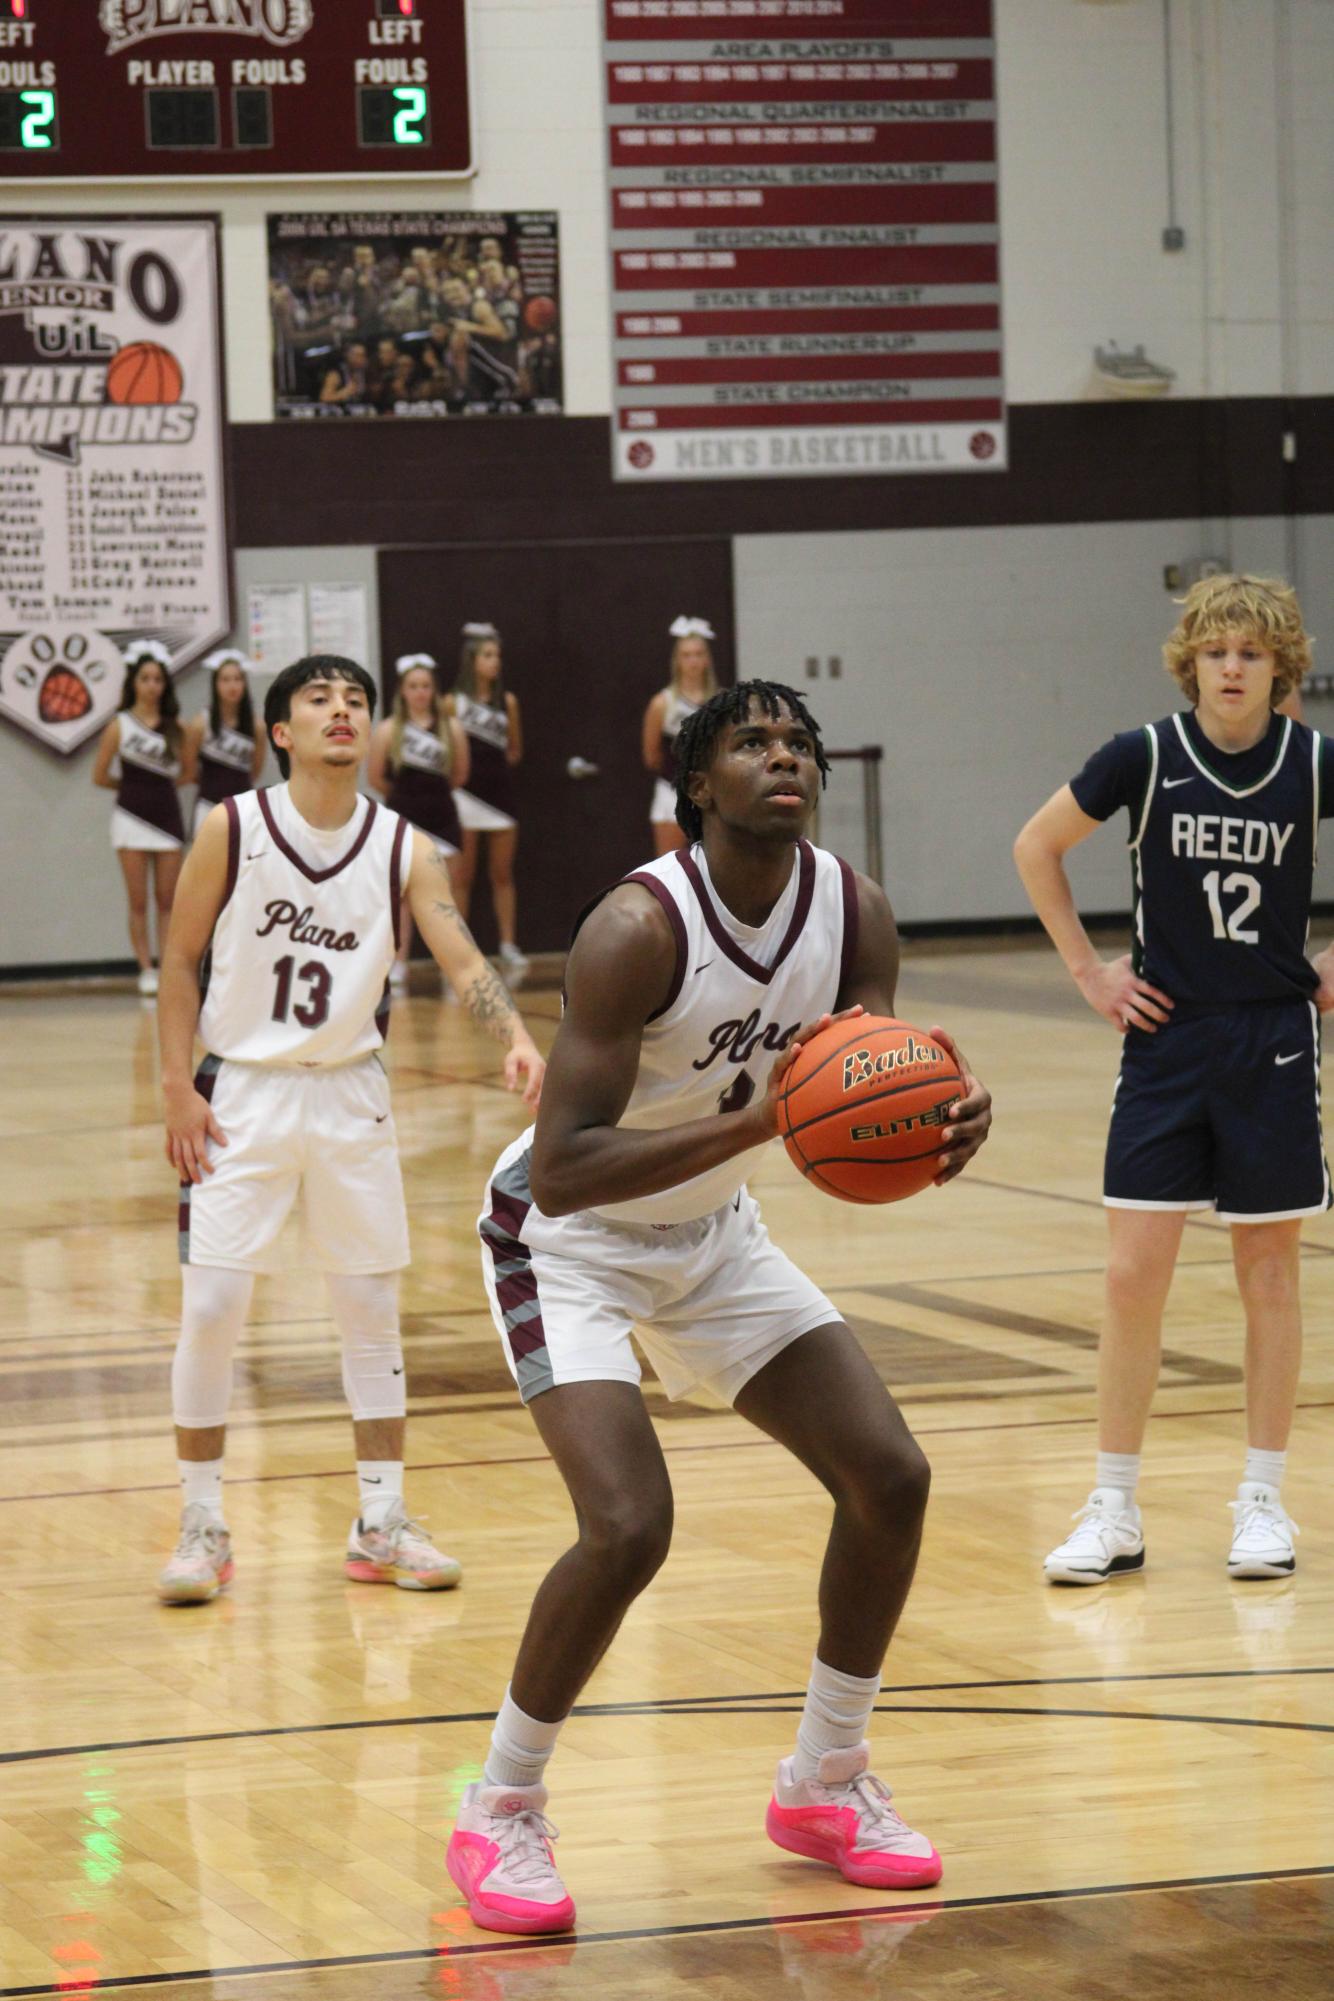 Plano Basketball: Overcoming Adversity and Building a New Legacy